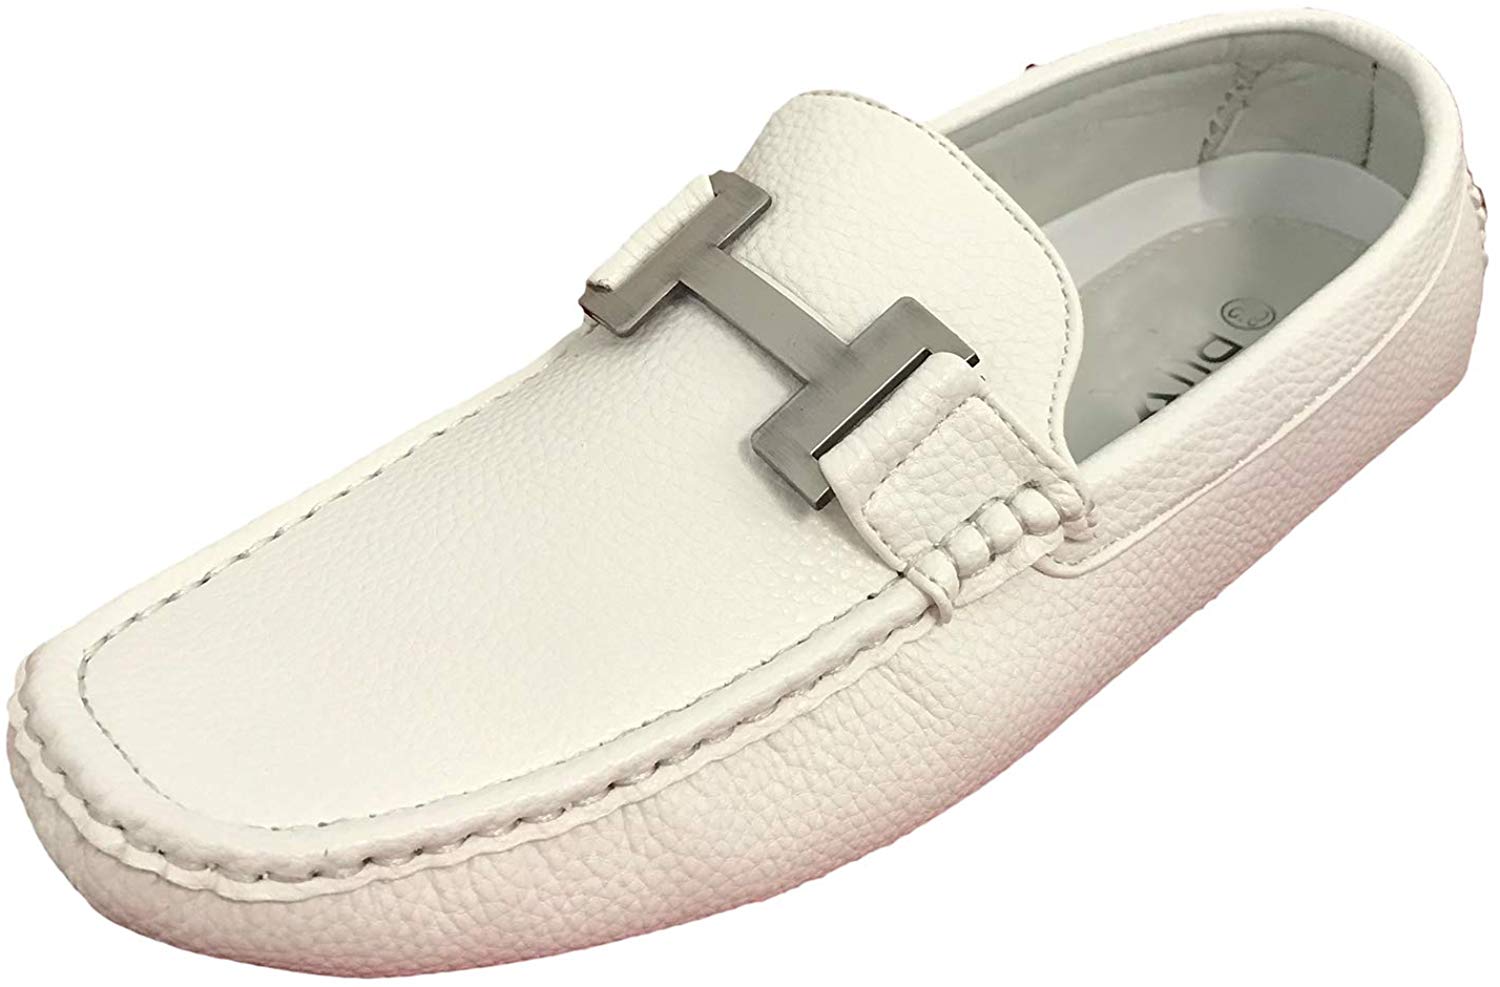 Men's Driving Moccasins Loafers Moc Toe Metal Buckle Casual Slip On Shoes - image 1 of 4